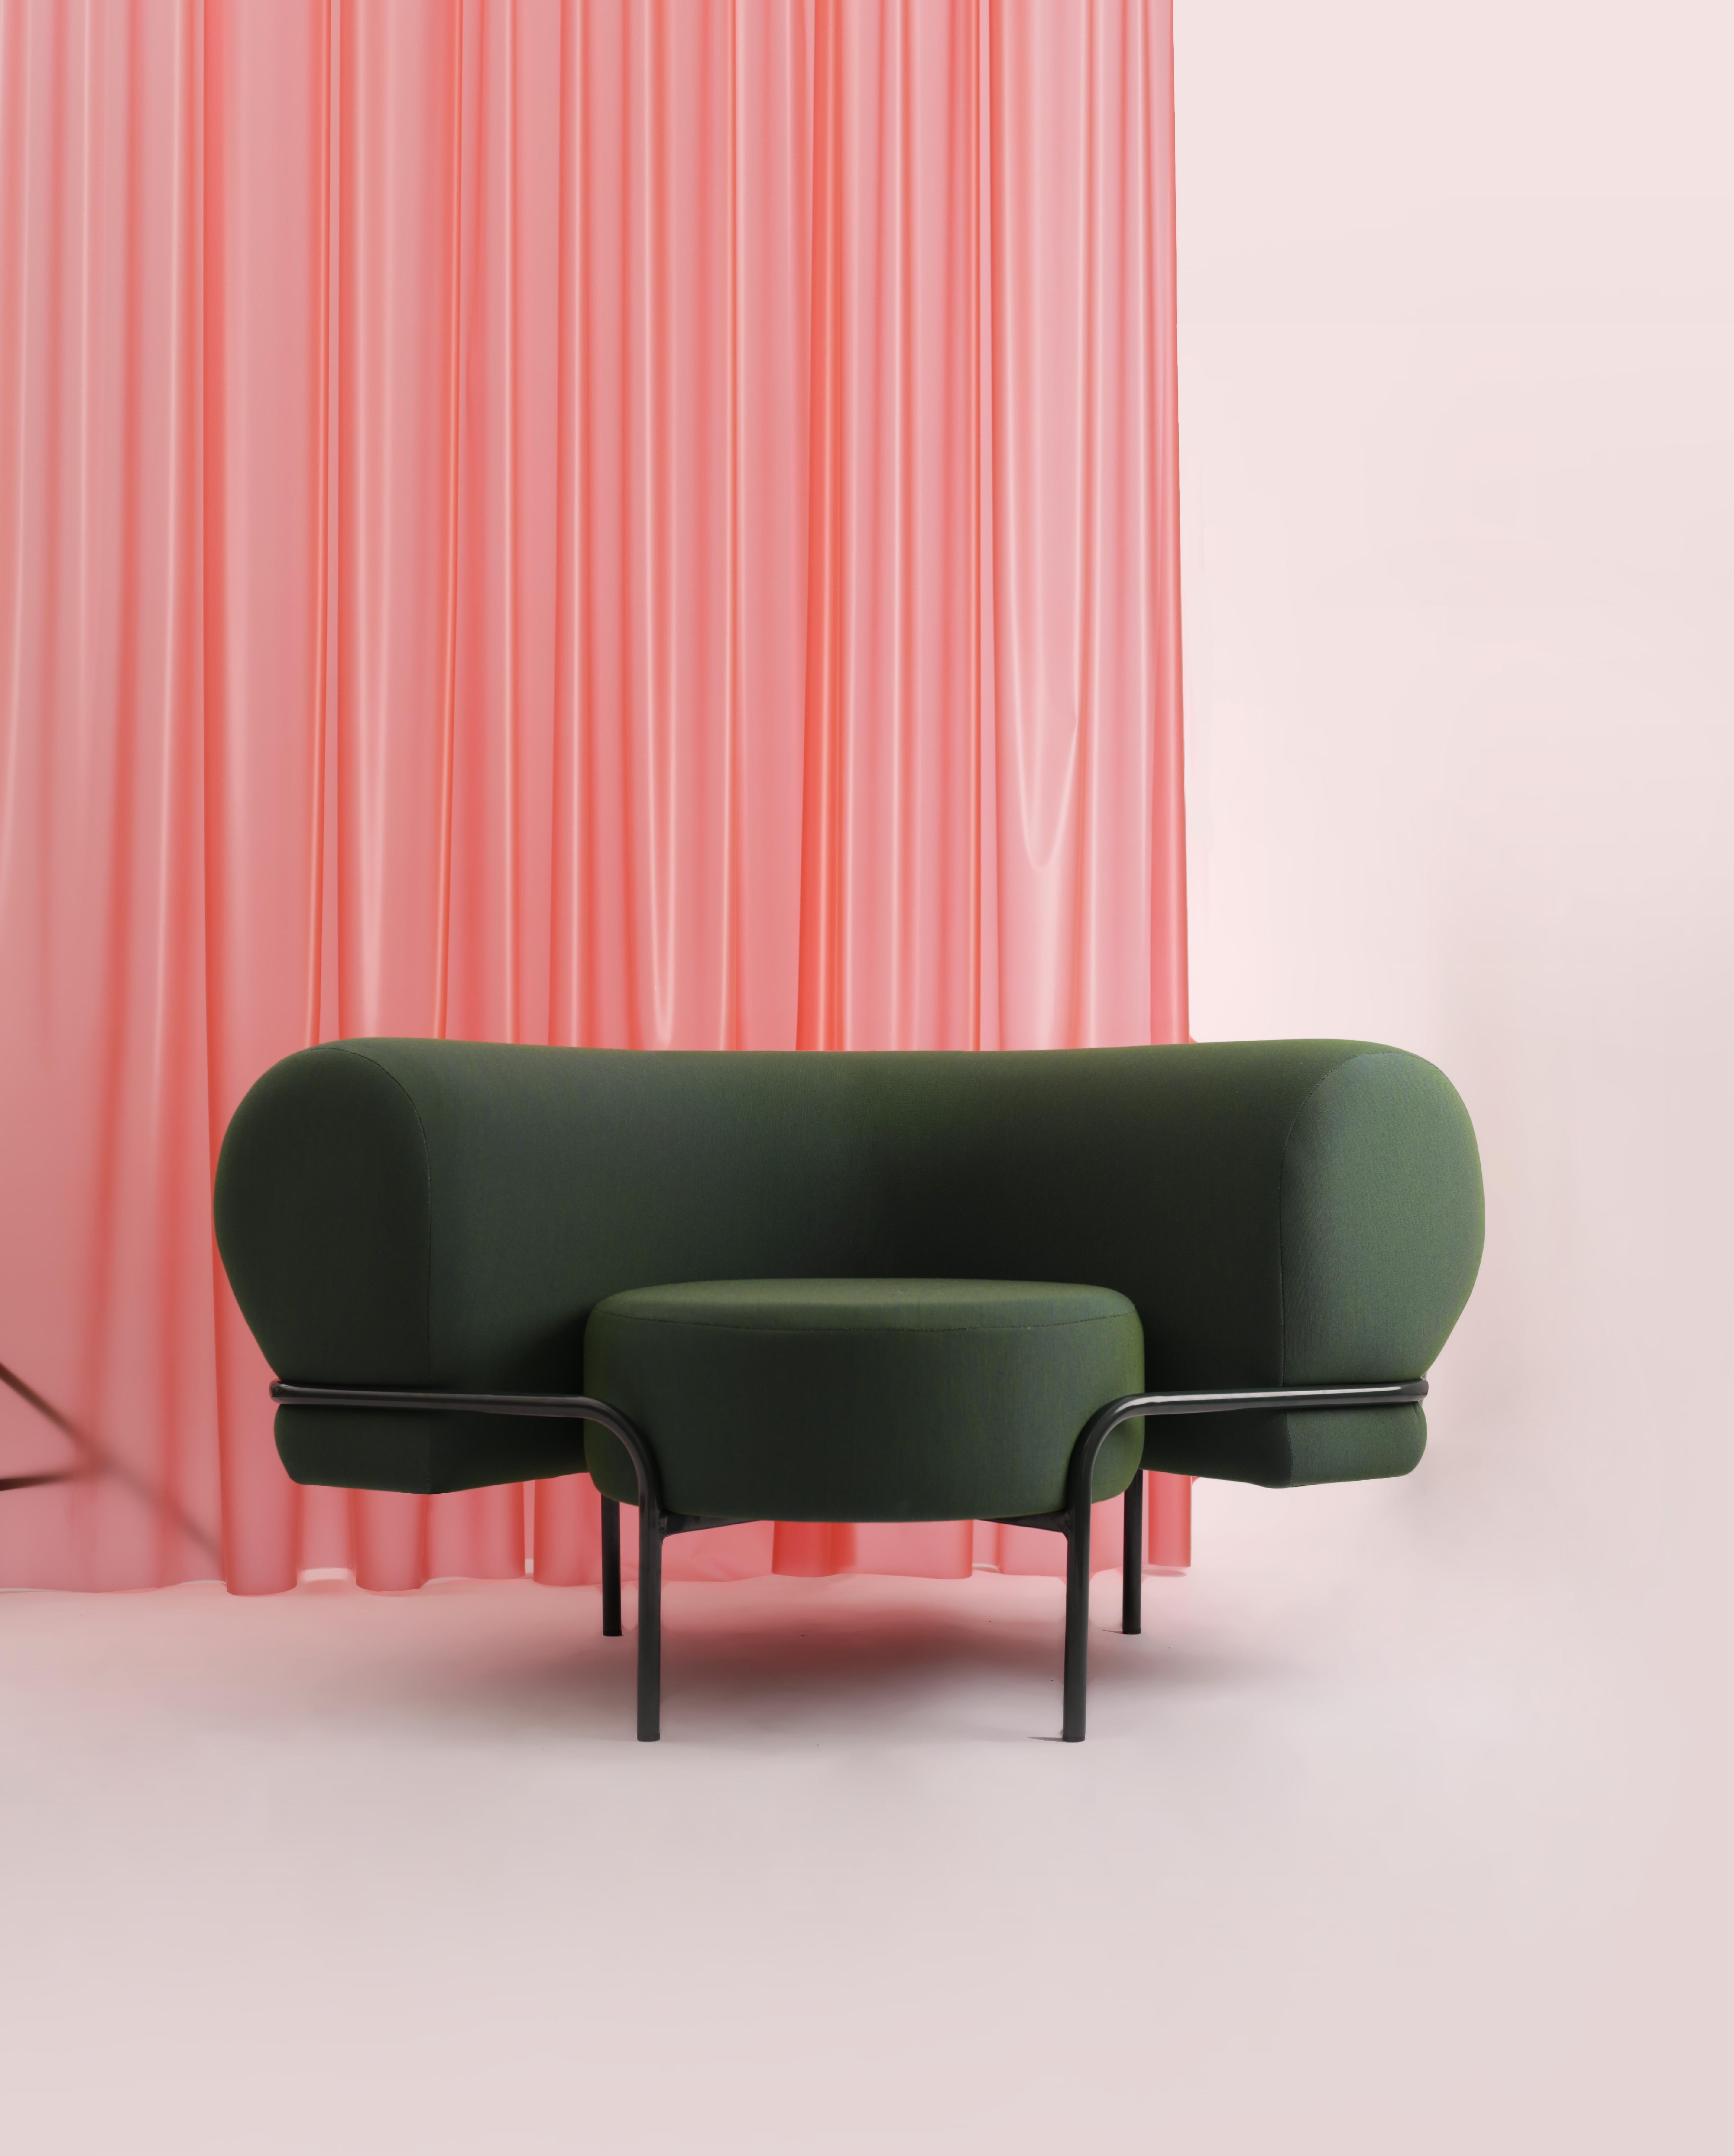 Mellow is an armchair designed to curve around the body, providing a sense of comfort and well-being. It all starts with two soft and rounded shapes, a circle and a cylinder, that are tensioned and curved to embrace you and invite you to rest.
The